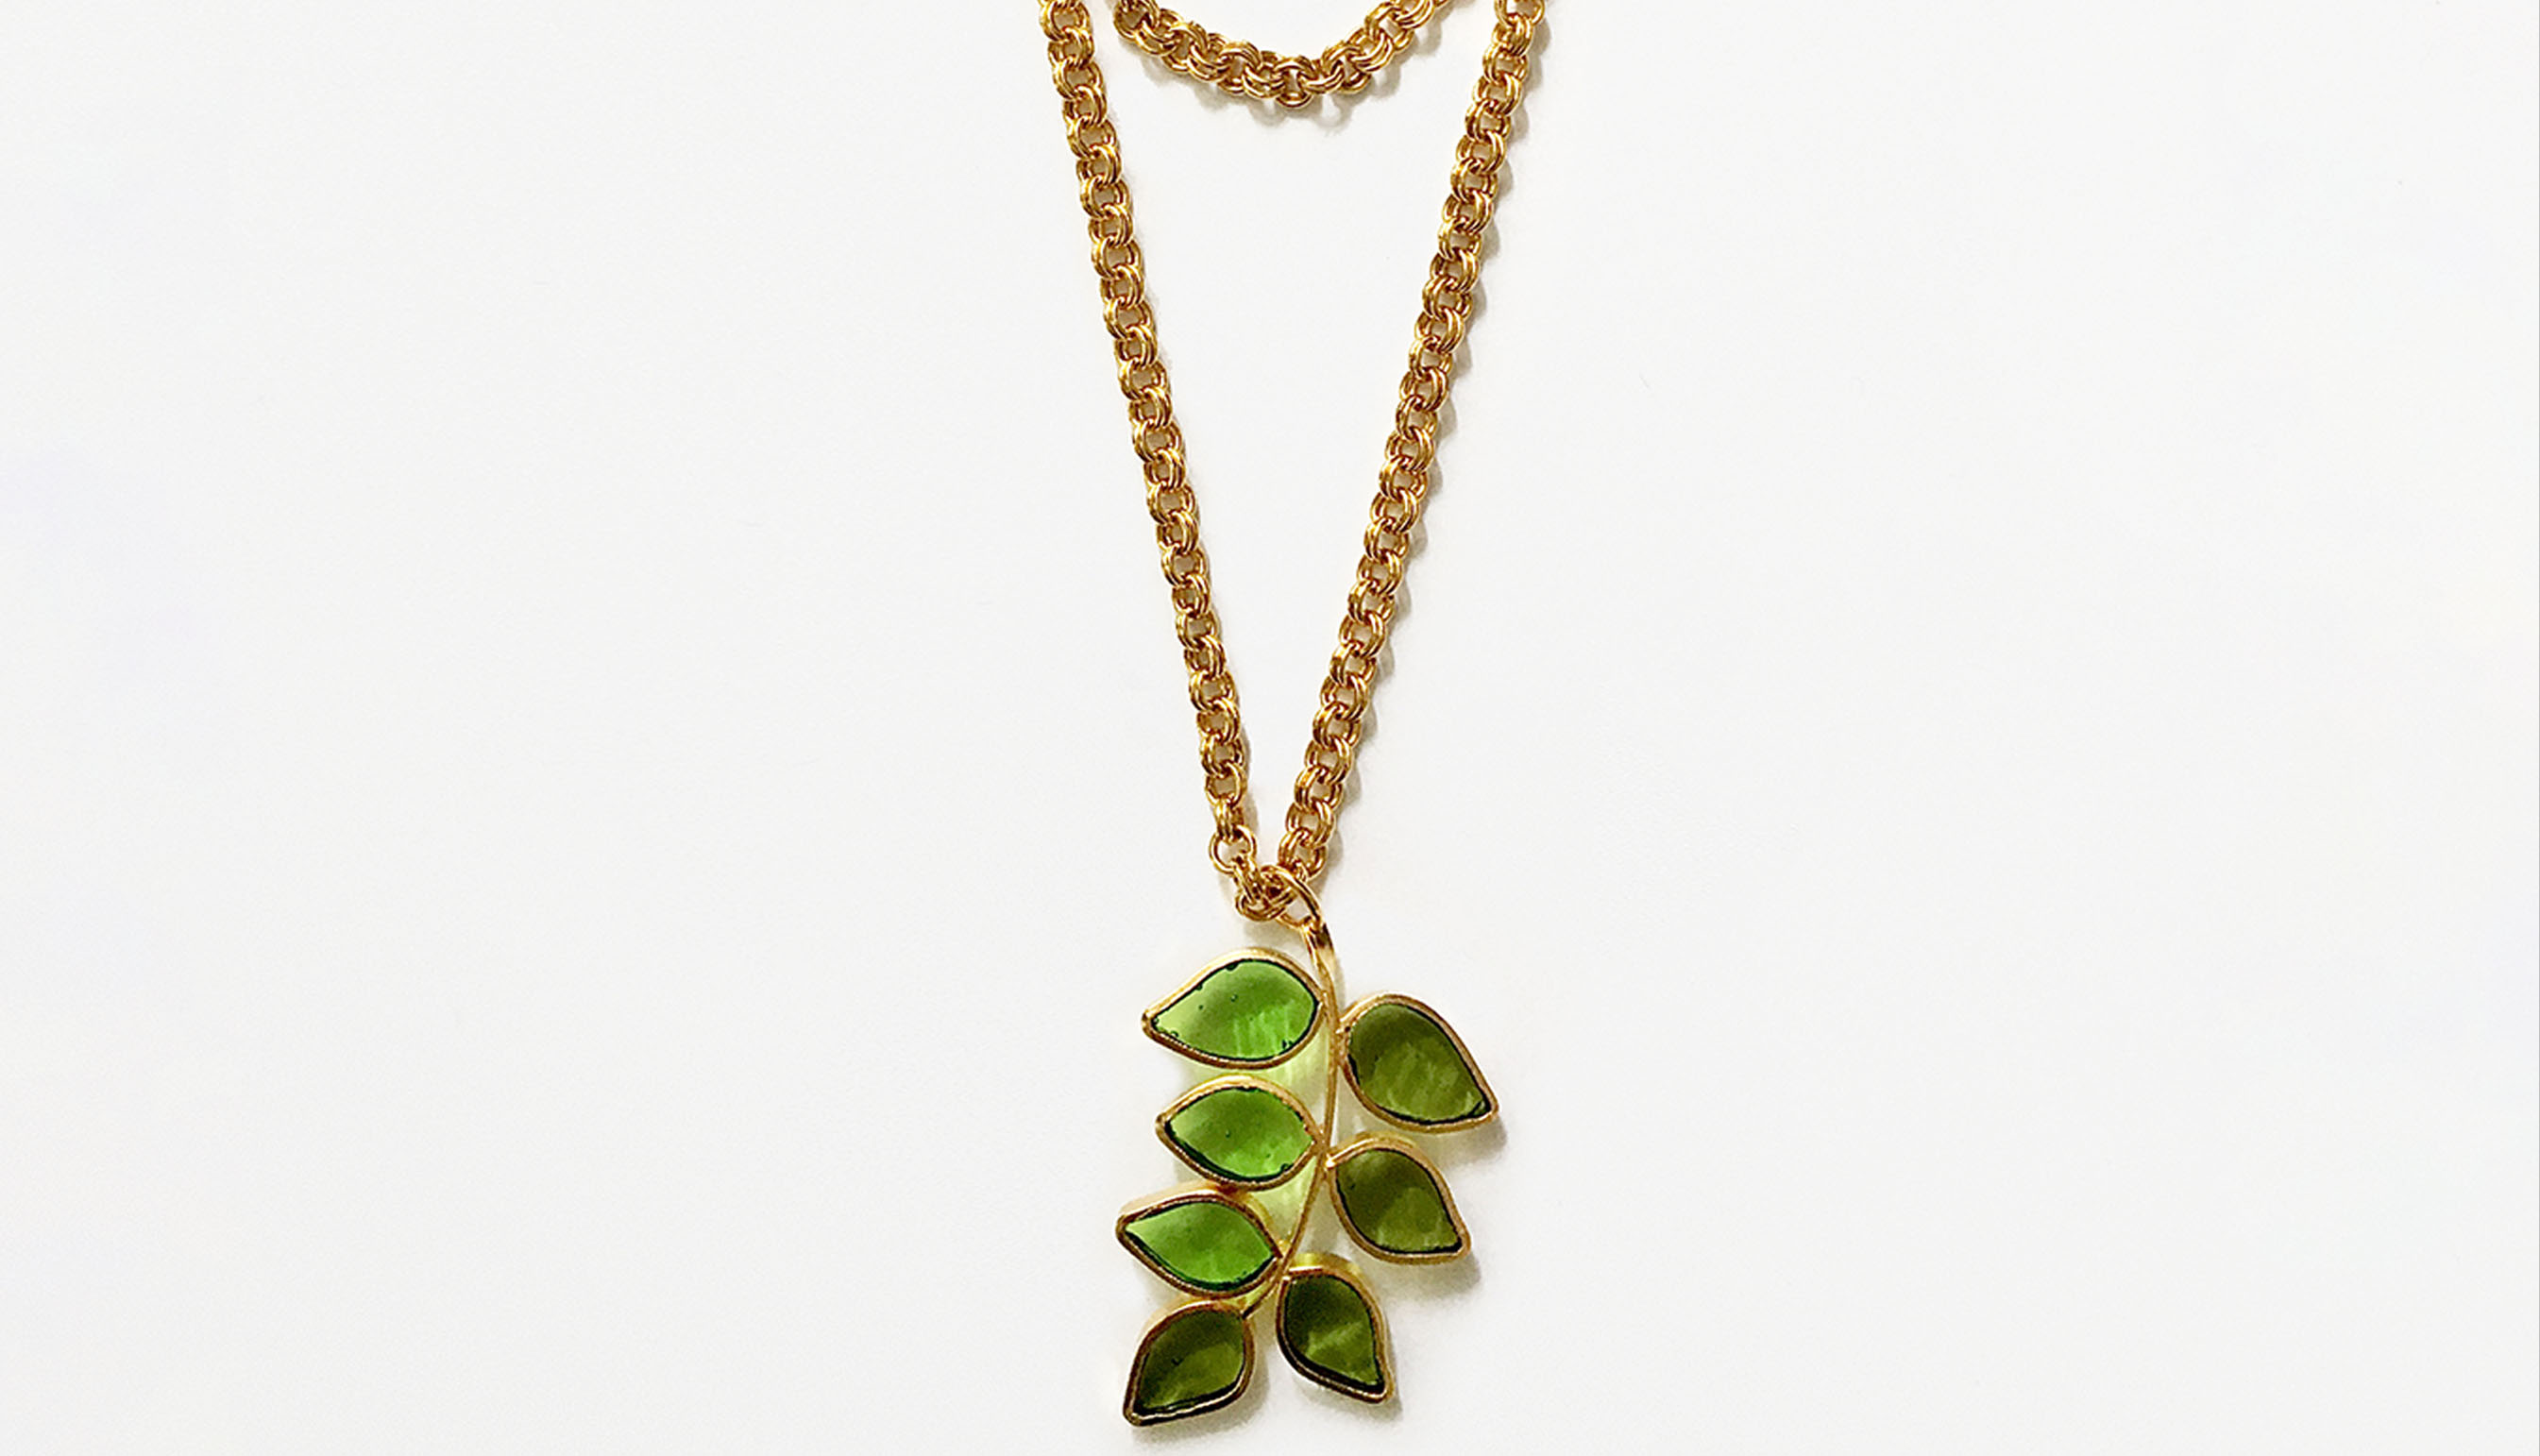 Leaf Pendant on a Long Chain